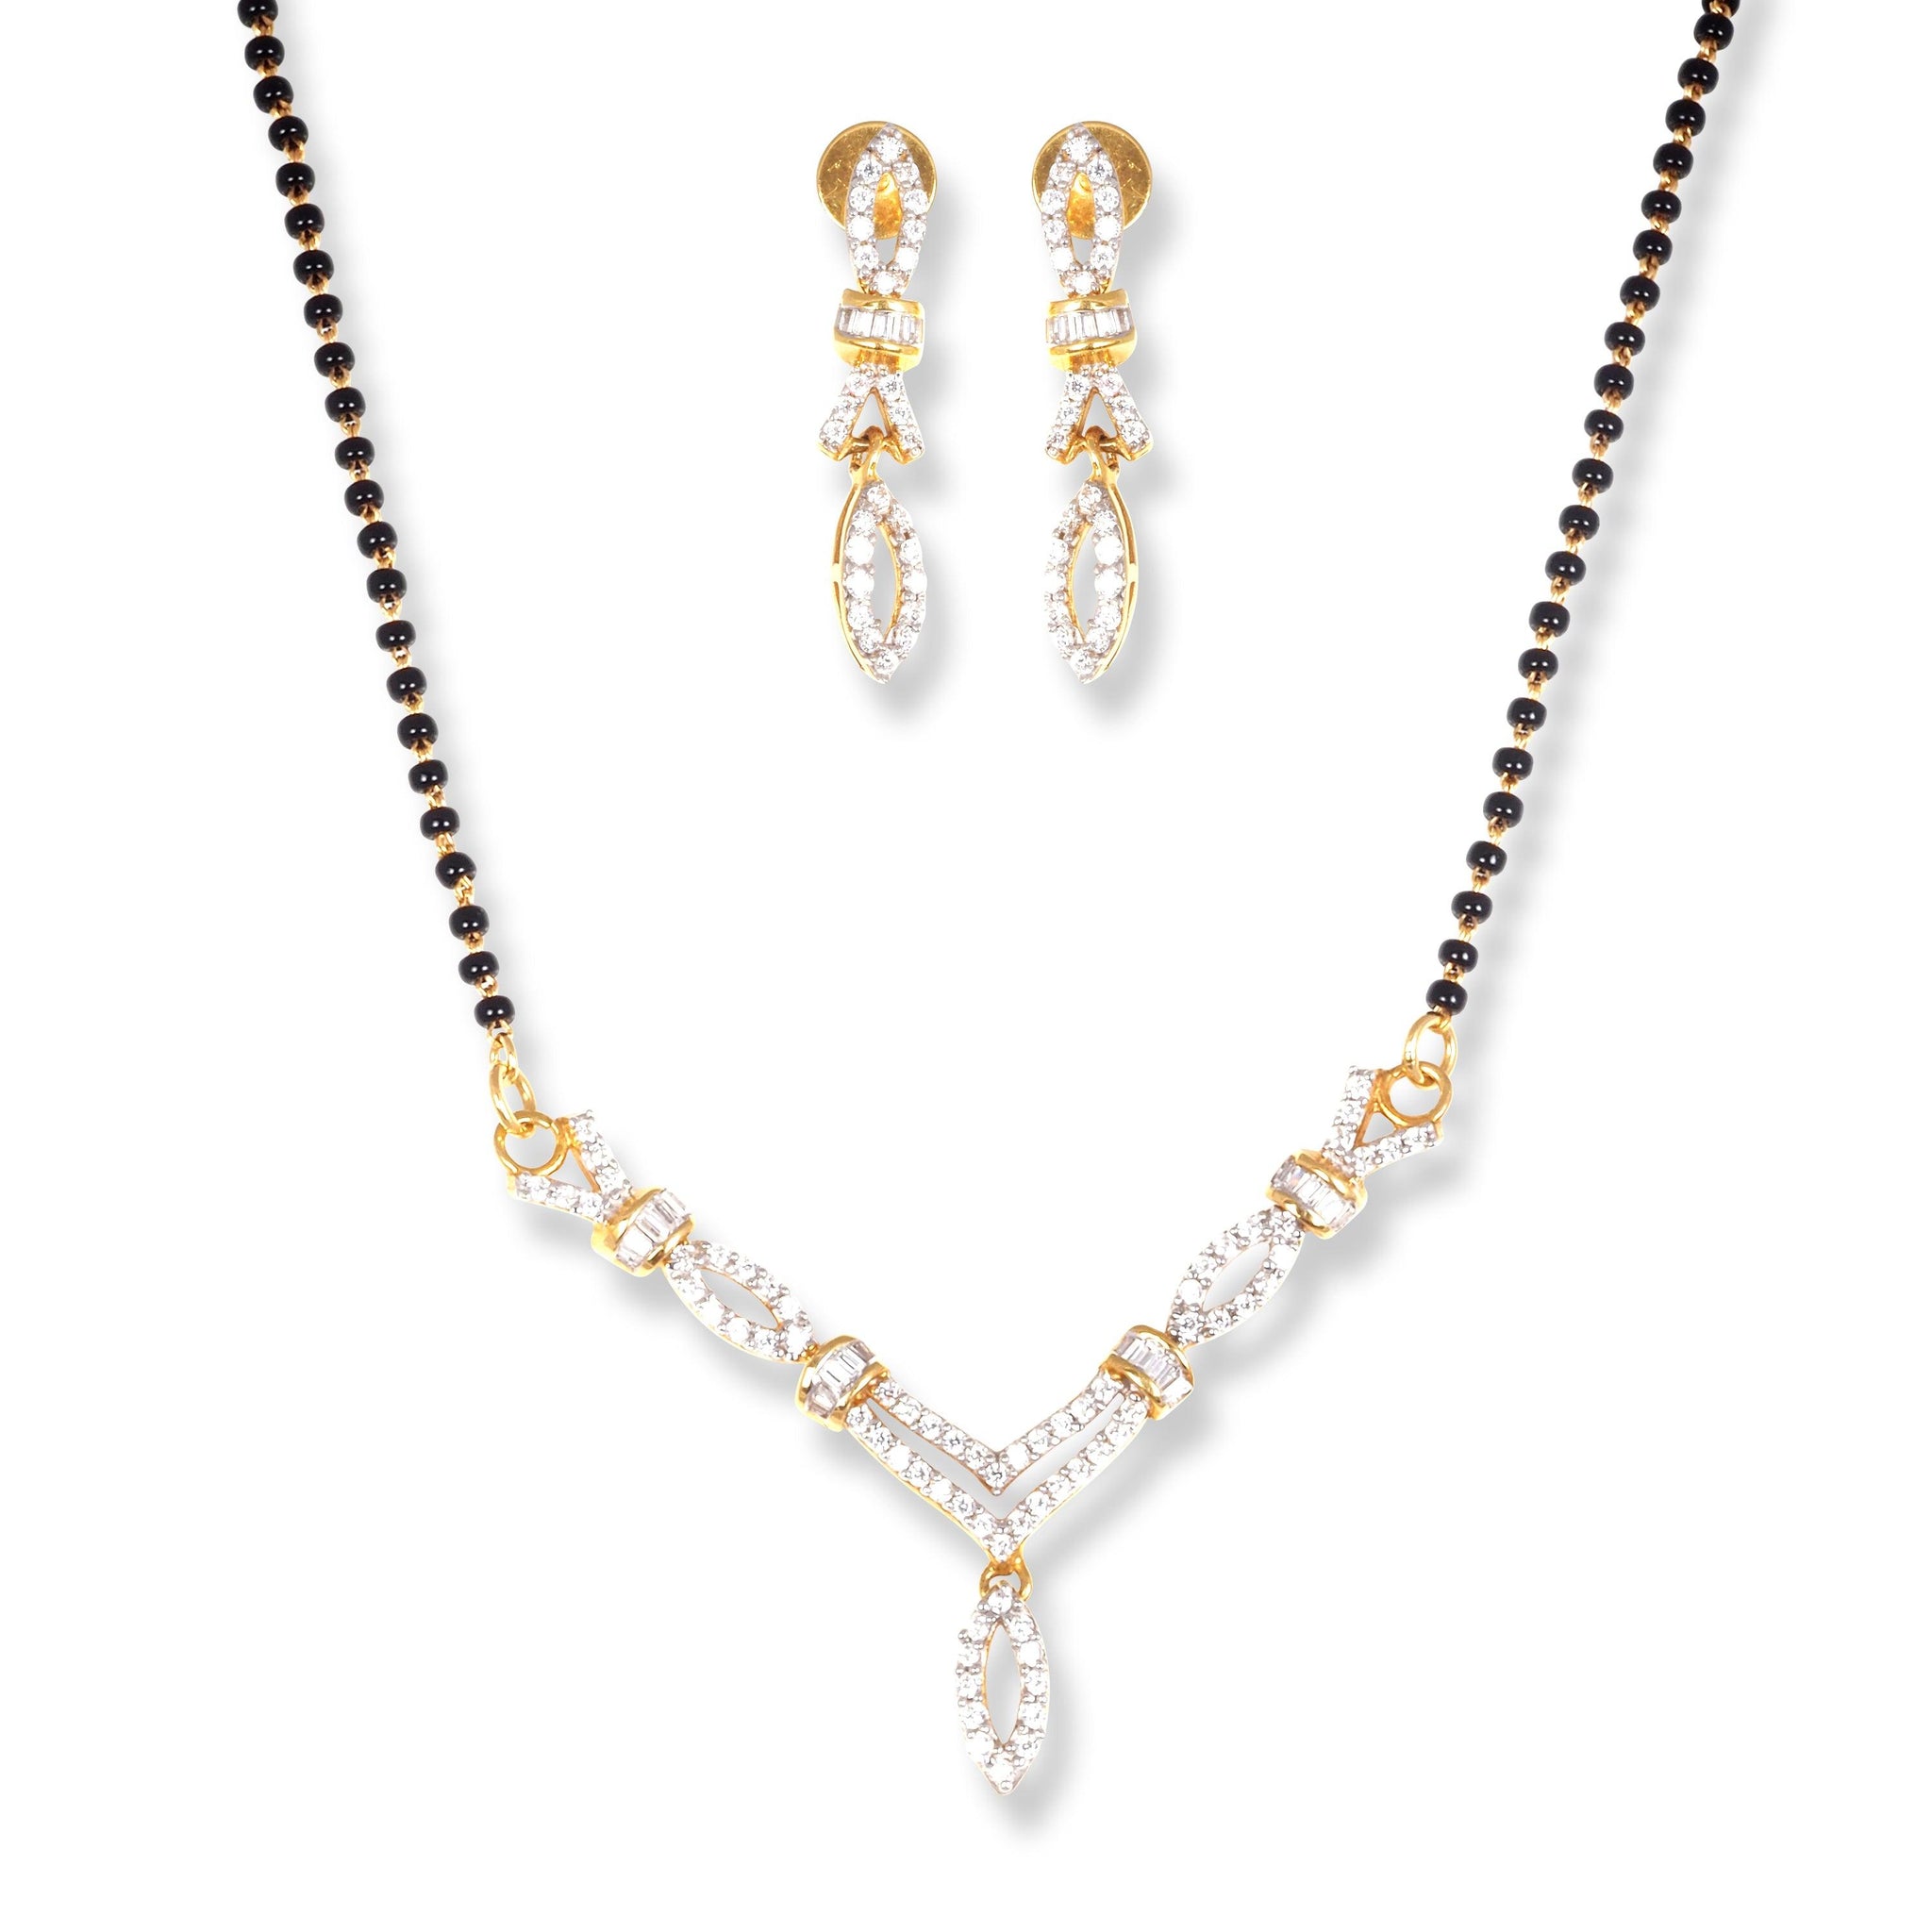 22ct Gold Mangal Sutra Set with Cubic Zirconia Stones and Lobster Clasp (Necklace + Drop Earrings)